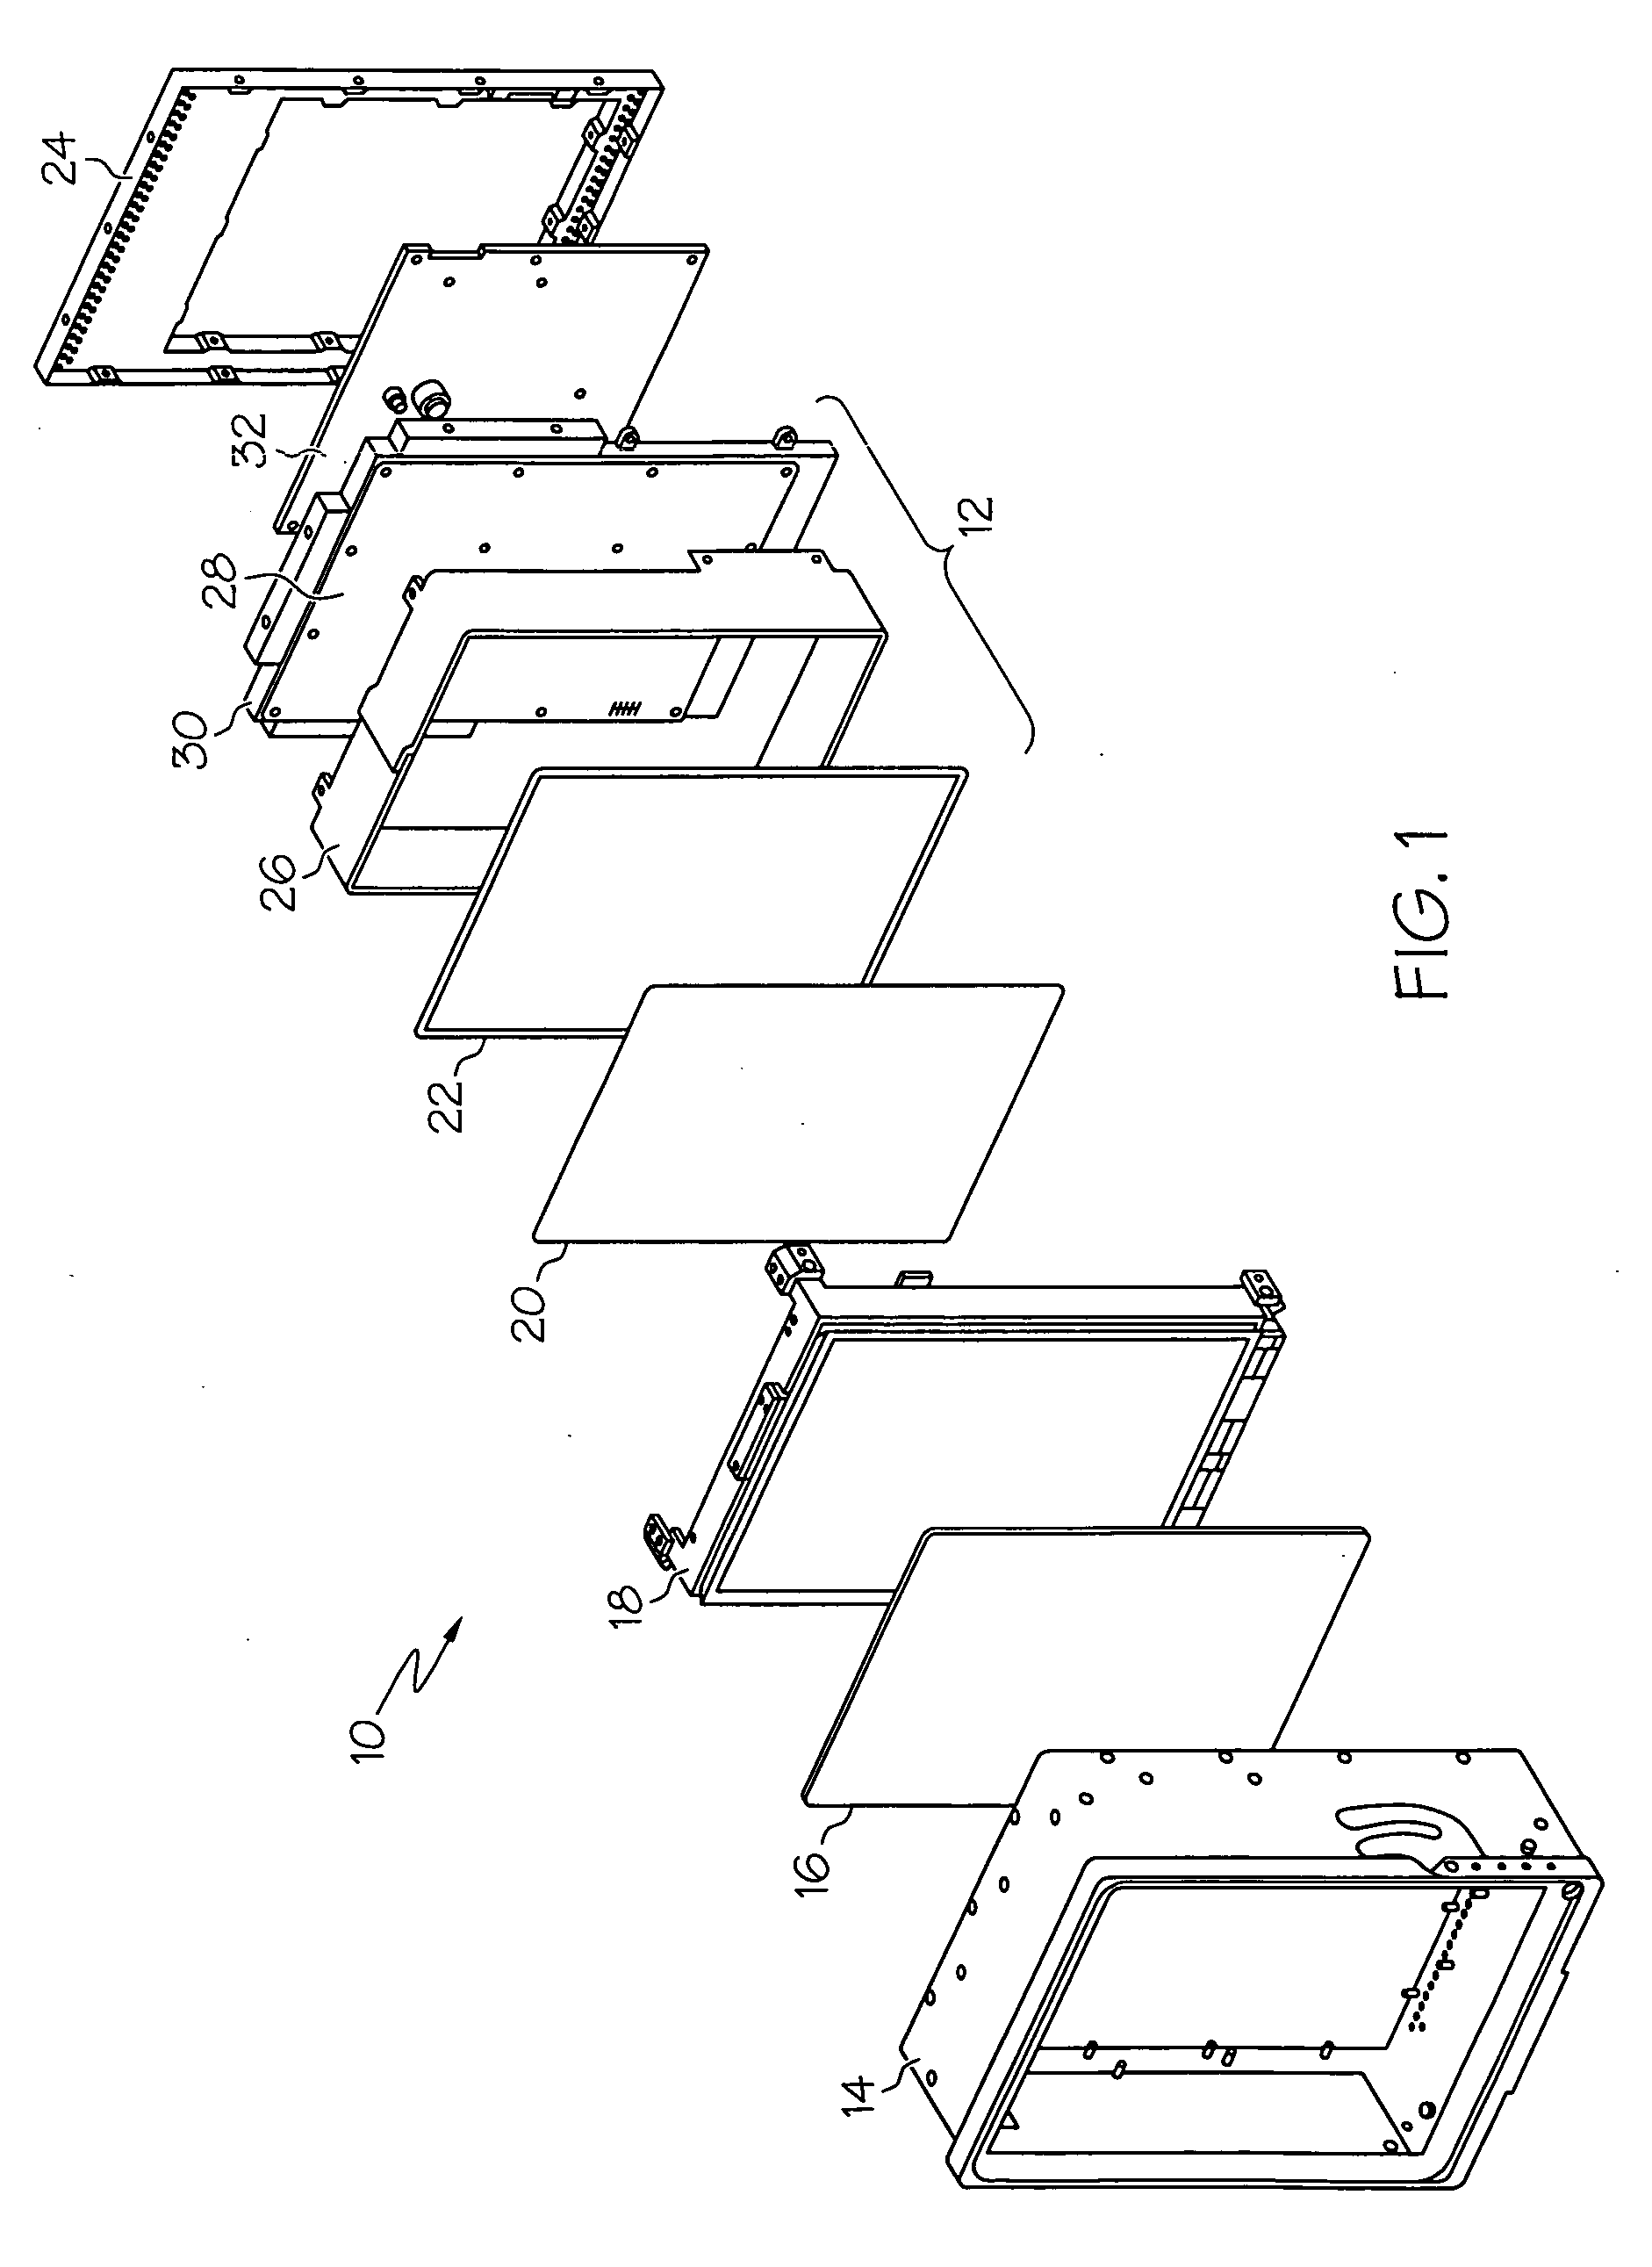 High efficiency backlight assembly for flat panel display assembly and method for the manufacture thereof